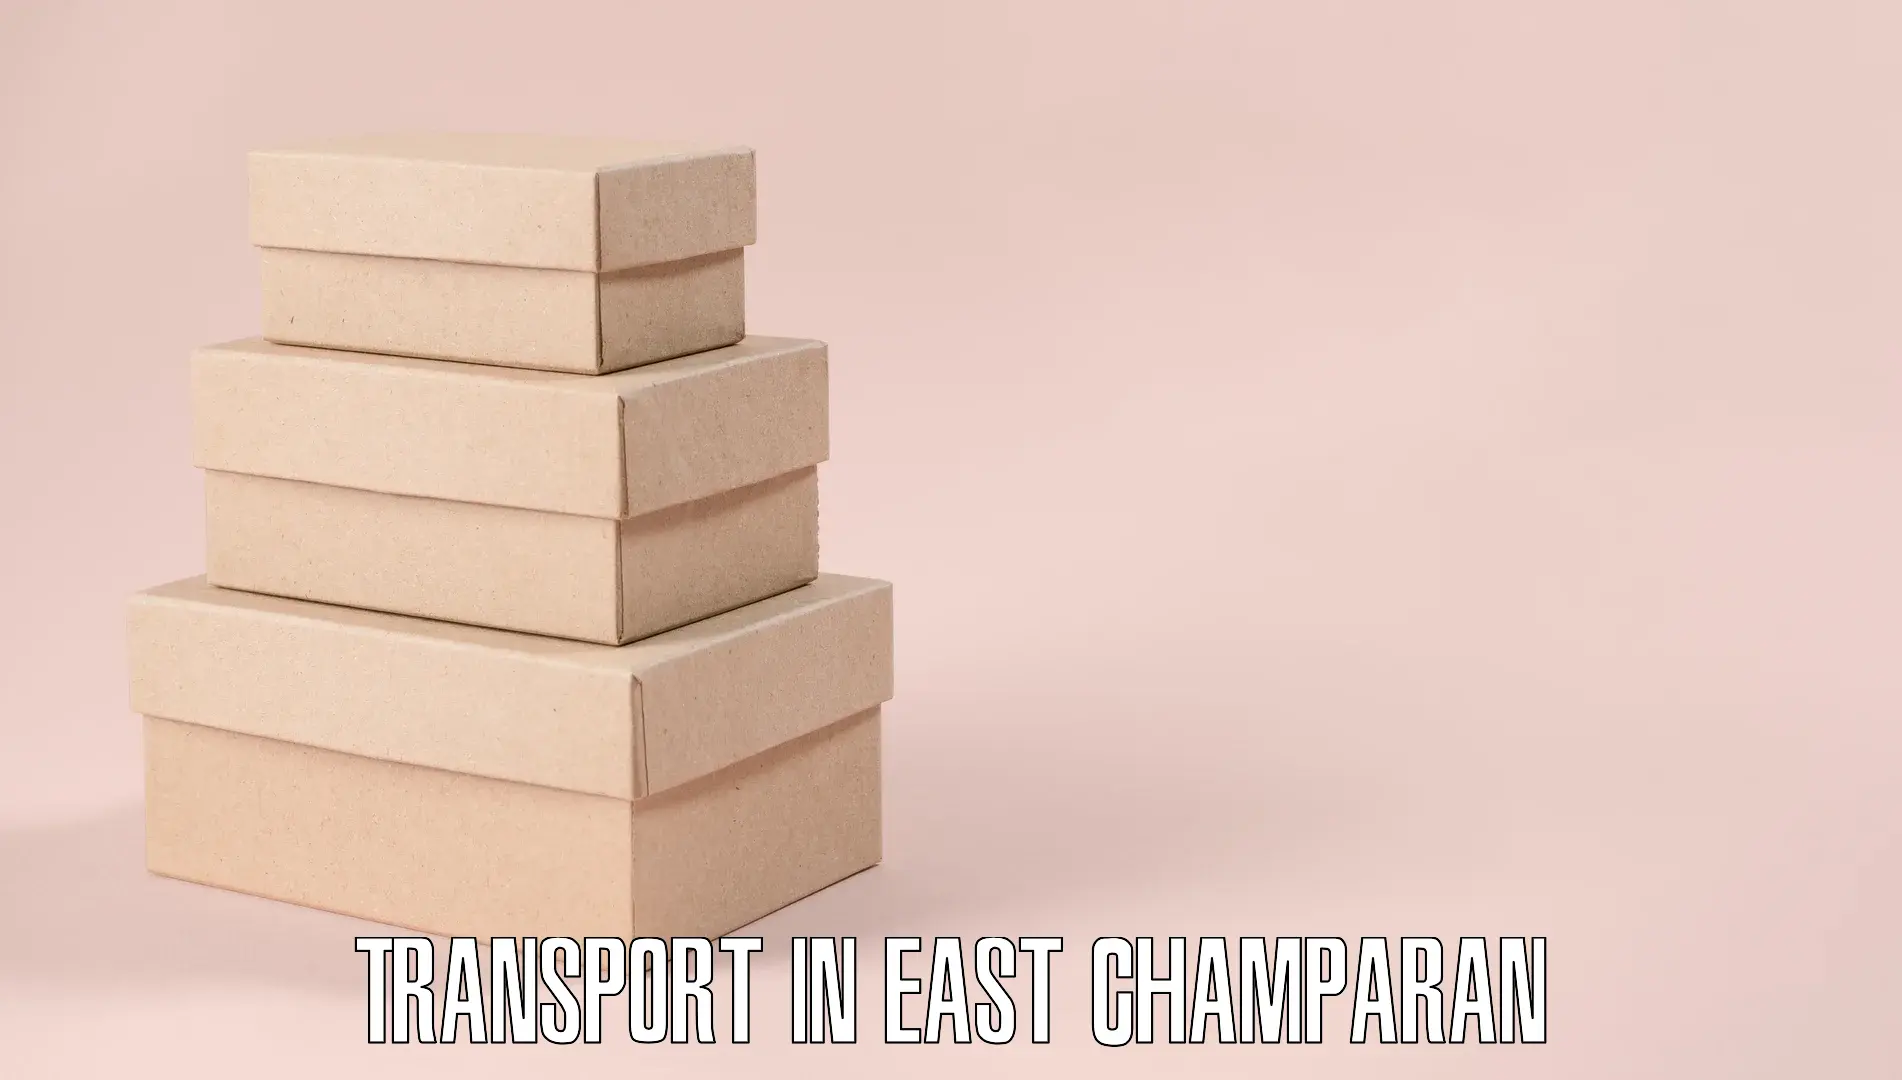 Daily parcel service transport in East Champaran